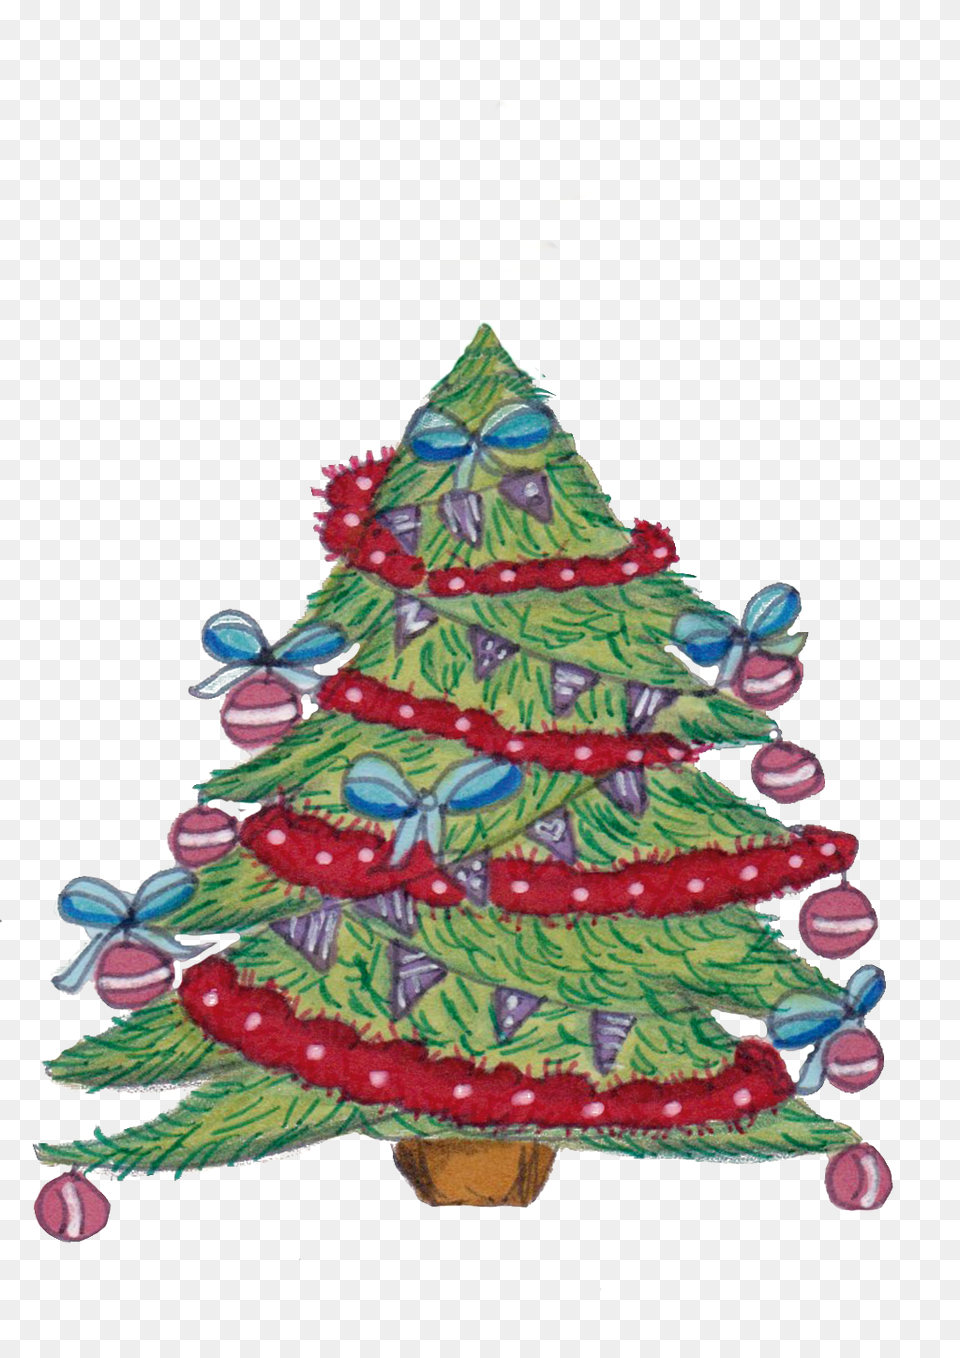 Painted Decorated Christmas Tree Transparent, Christmas Decorations, Festival, Plant, Christmas Tree Png Image